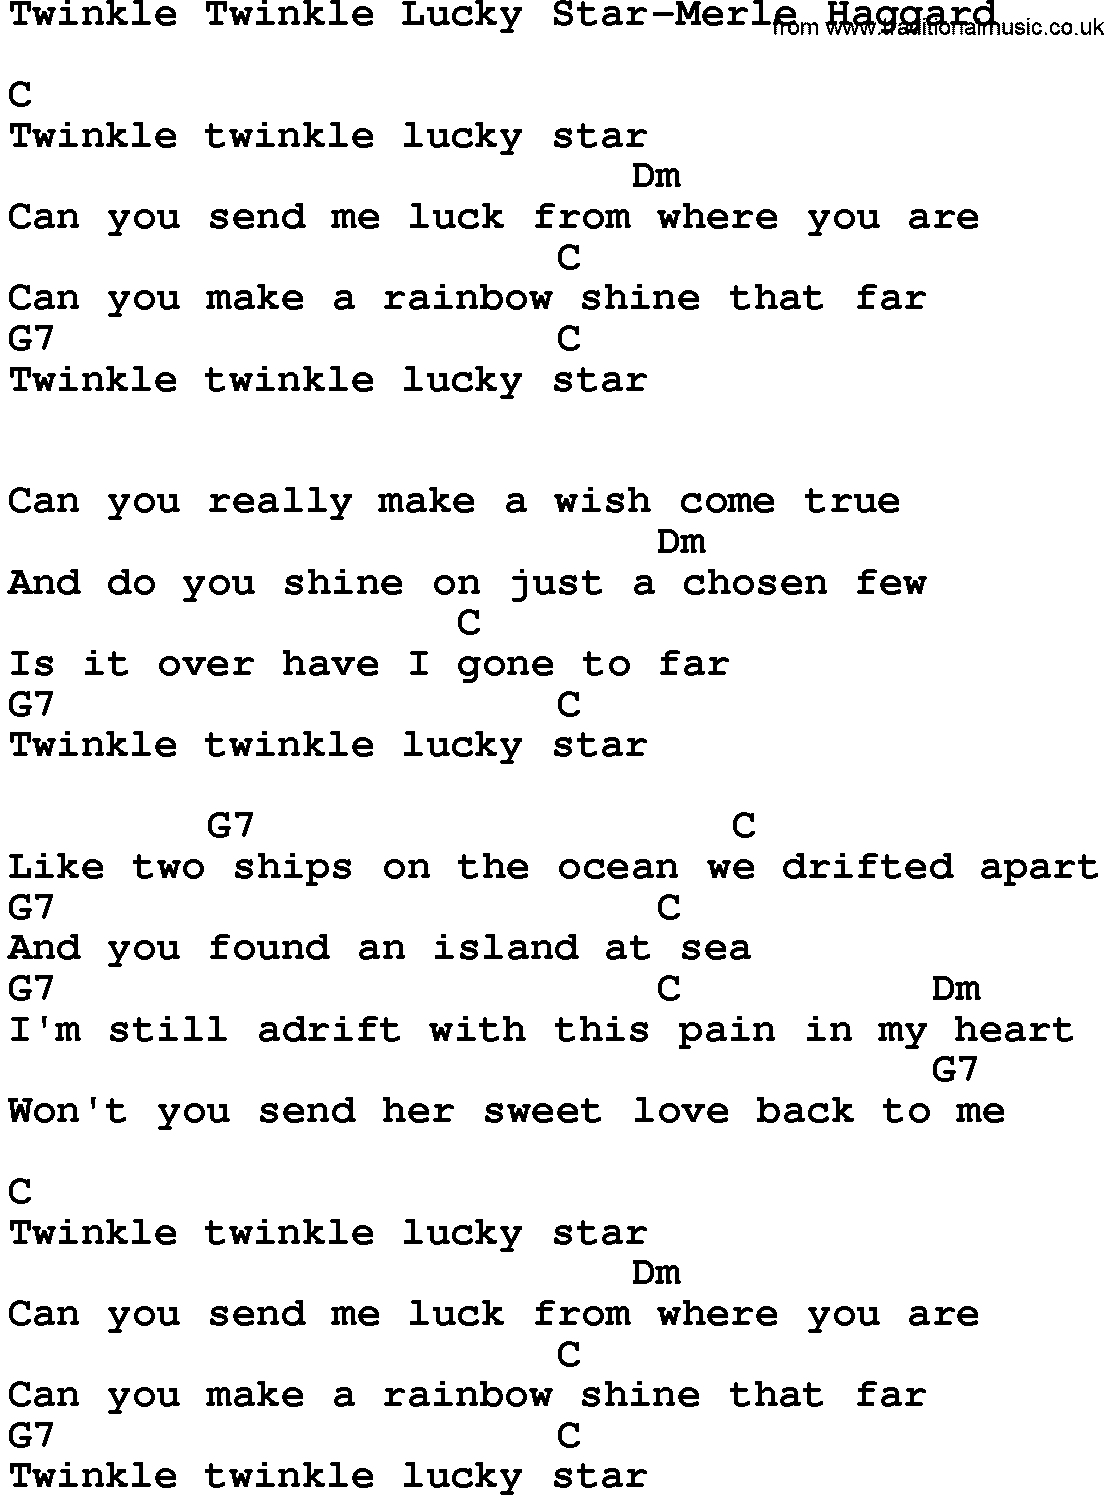 Country music song: Twinkle Twinkle Lucky Star-Merle Haggard lyrics and chords